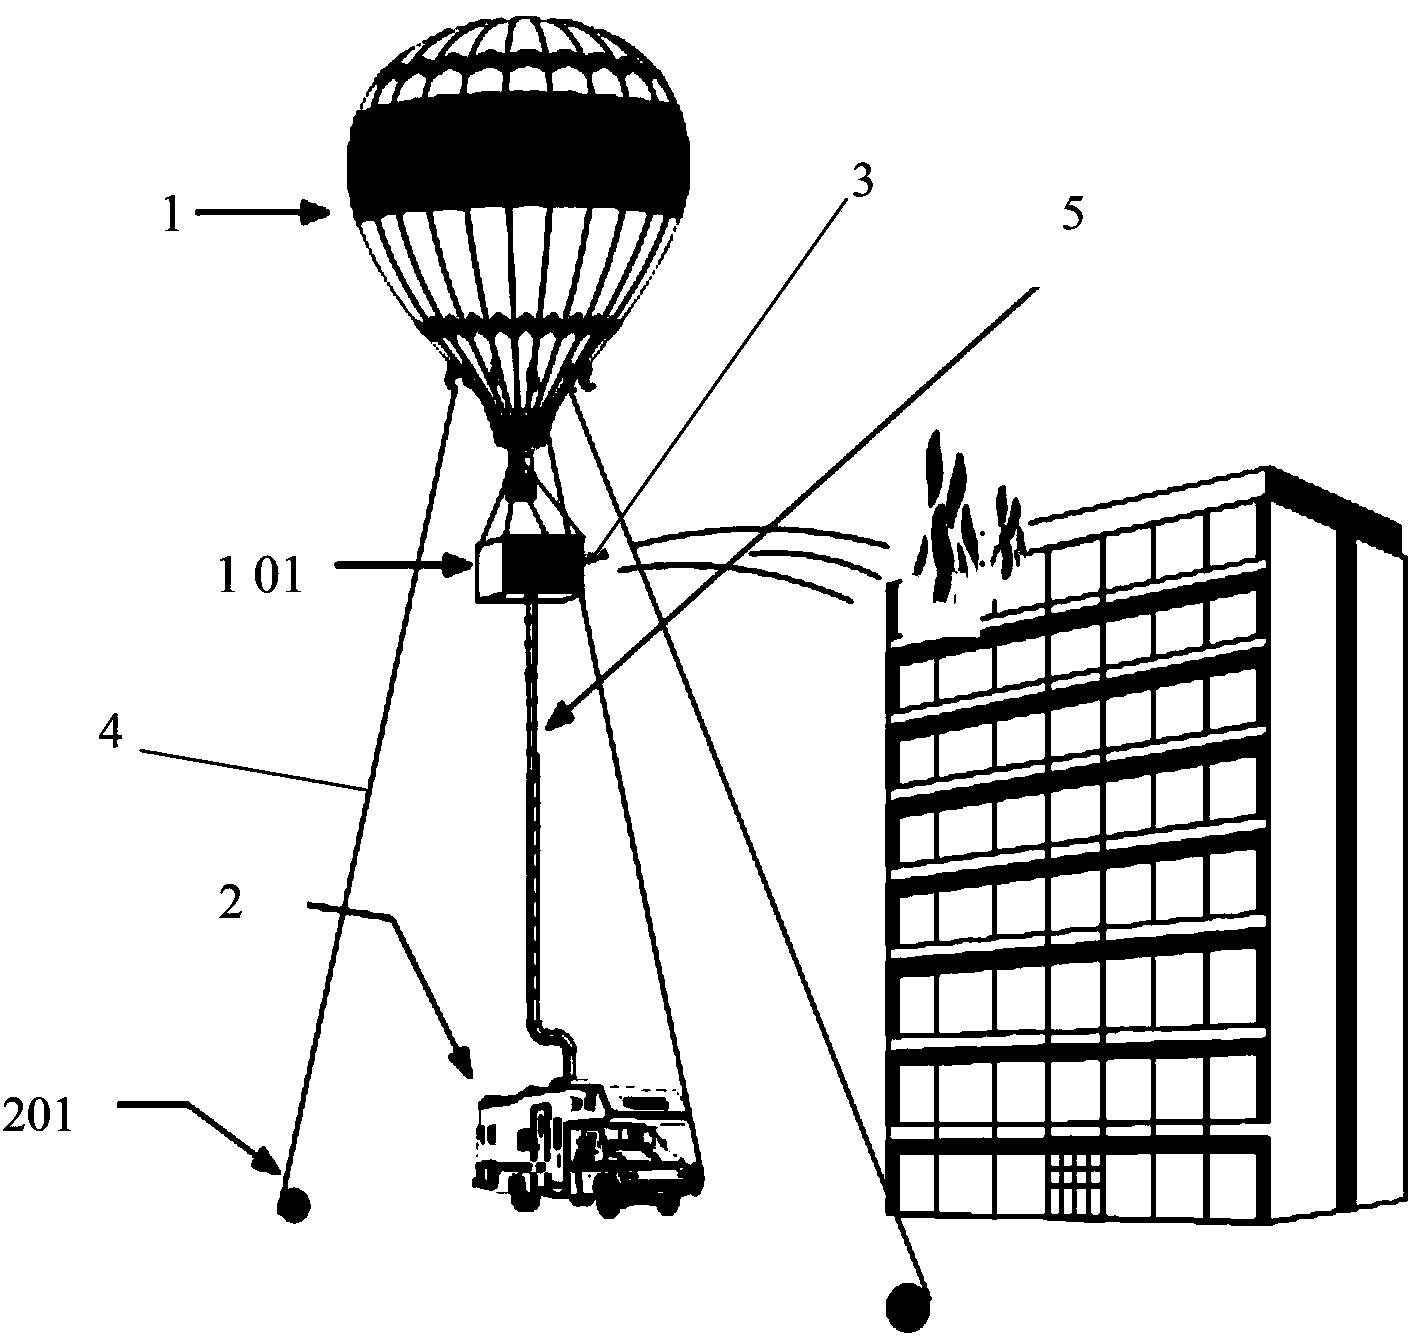 Overhead fixed-point continuous water spraying device based on hot air balloon